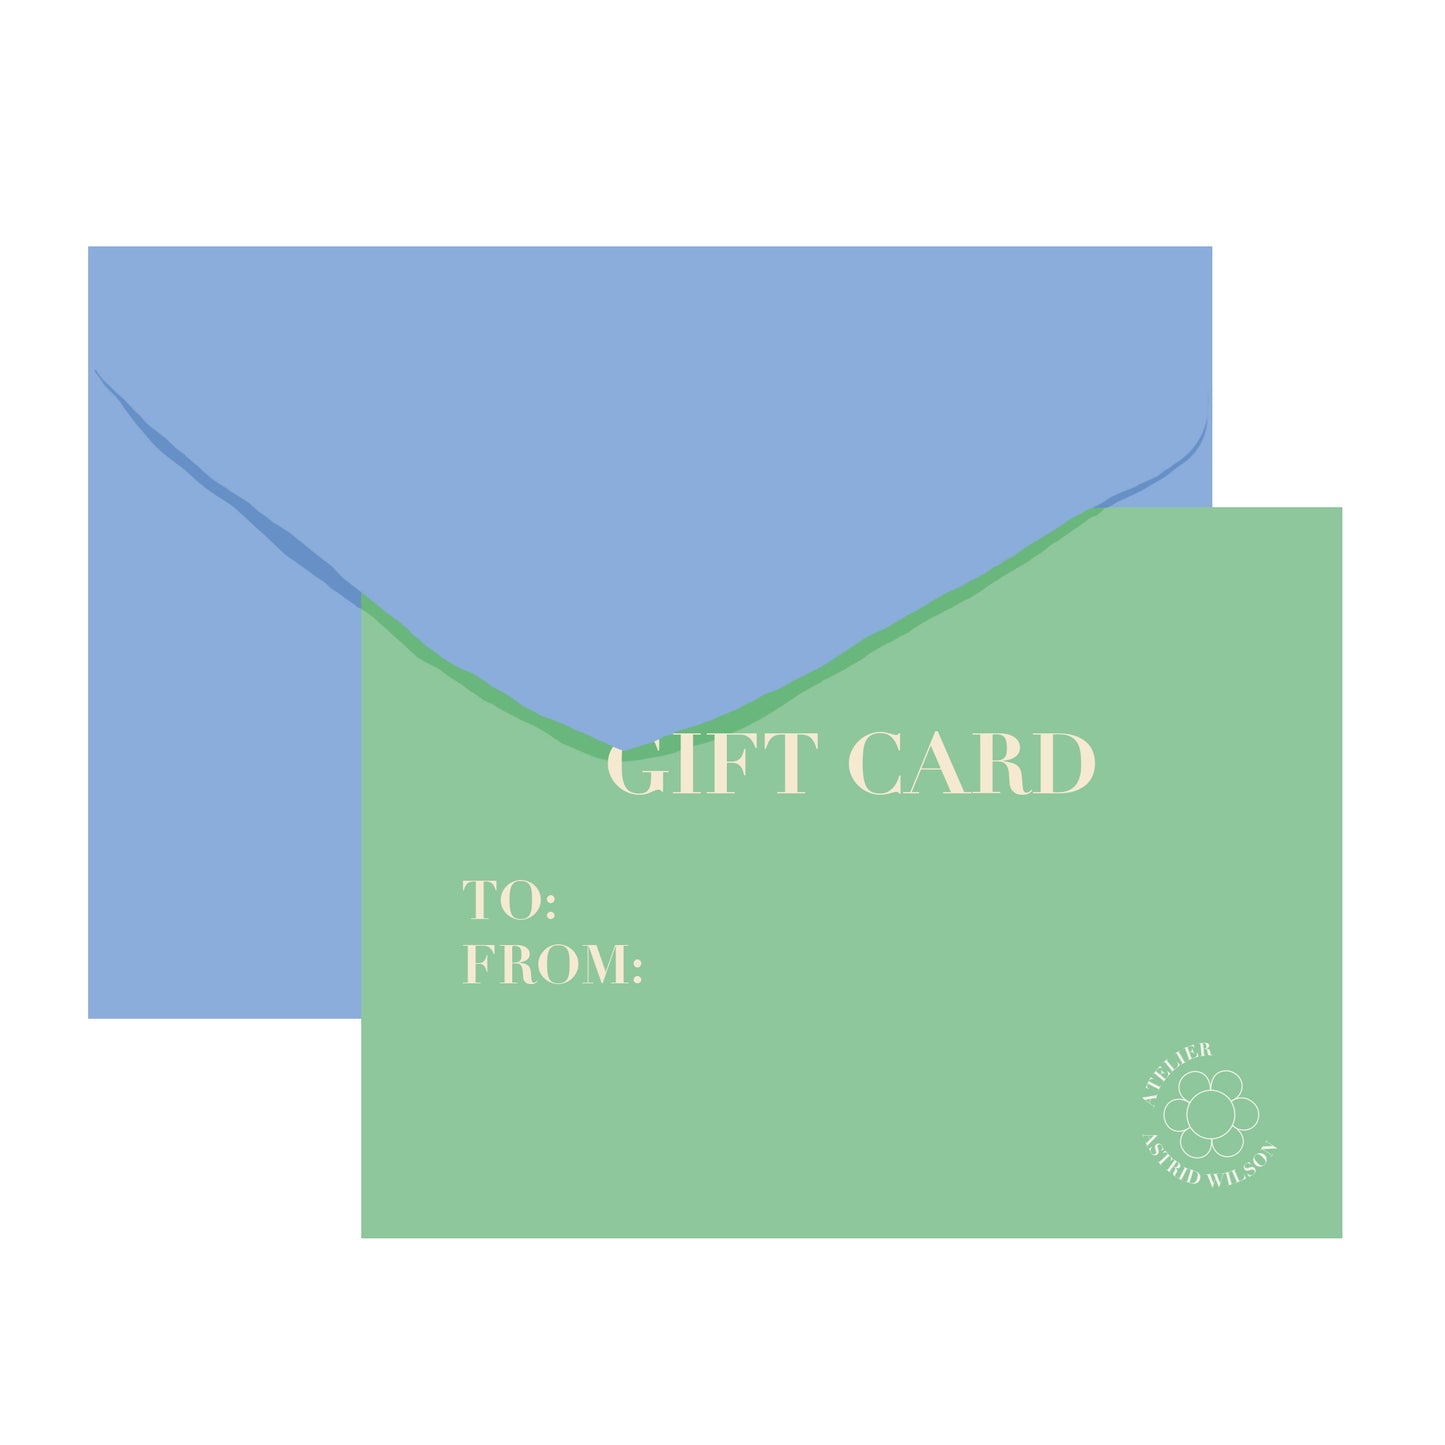 GIftcard